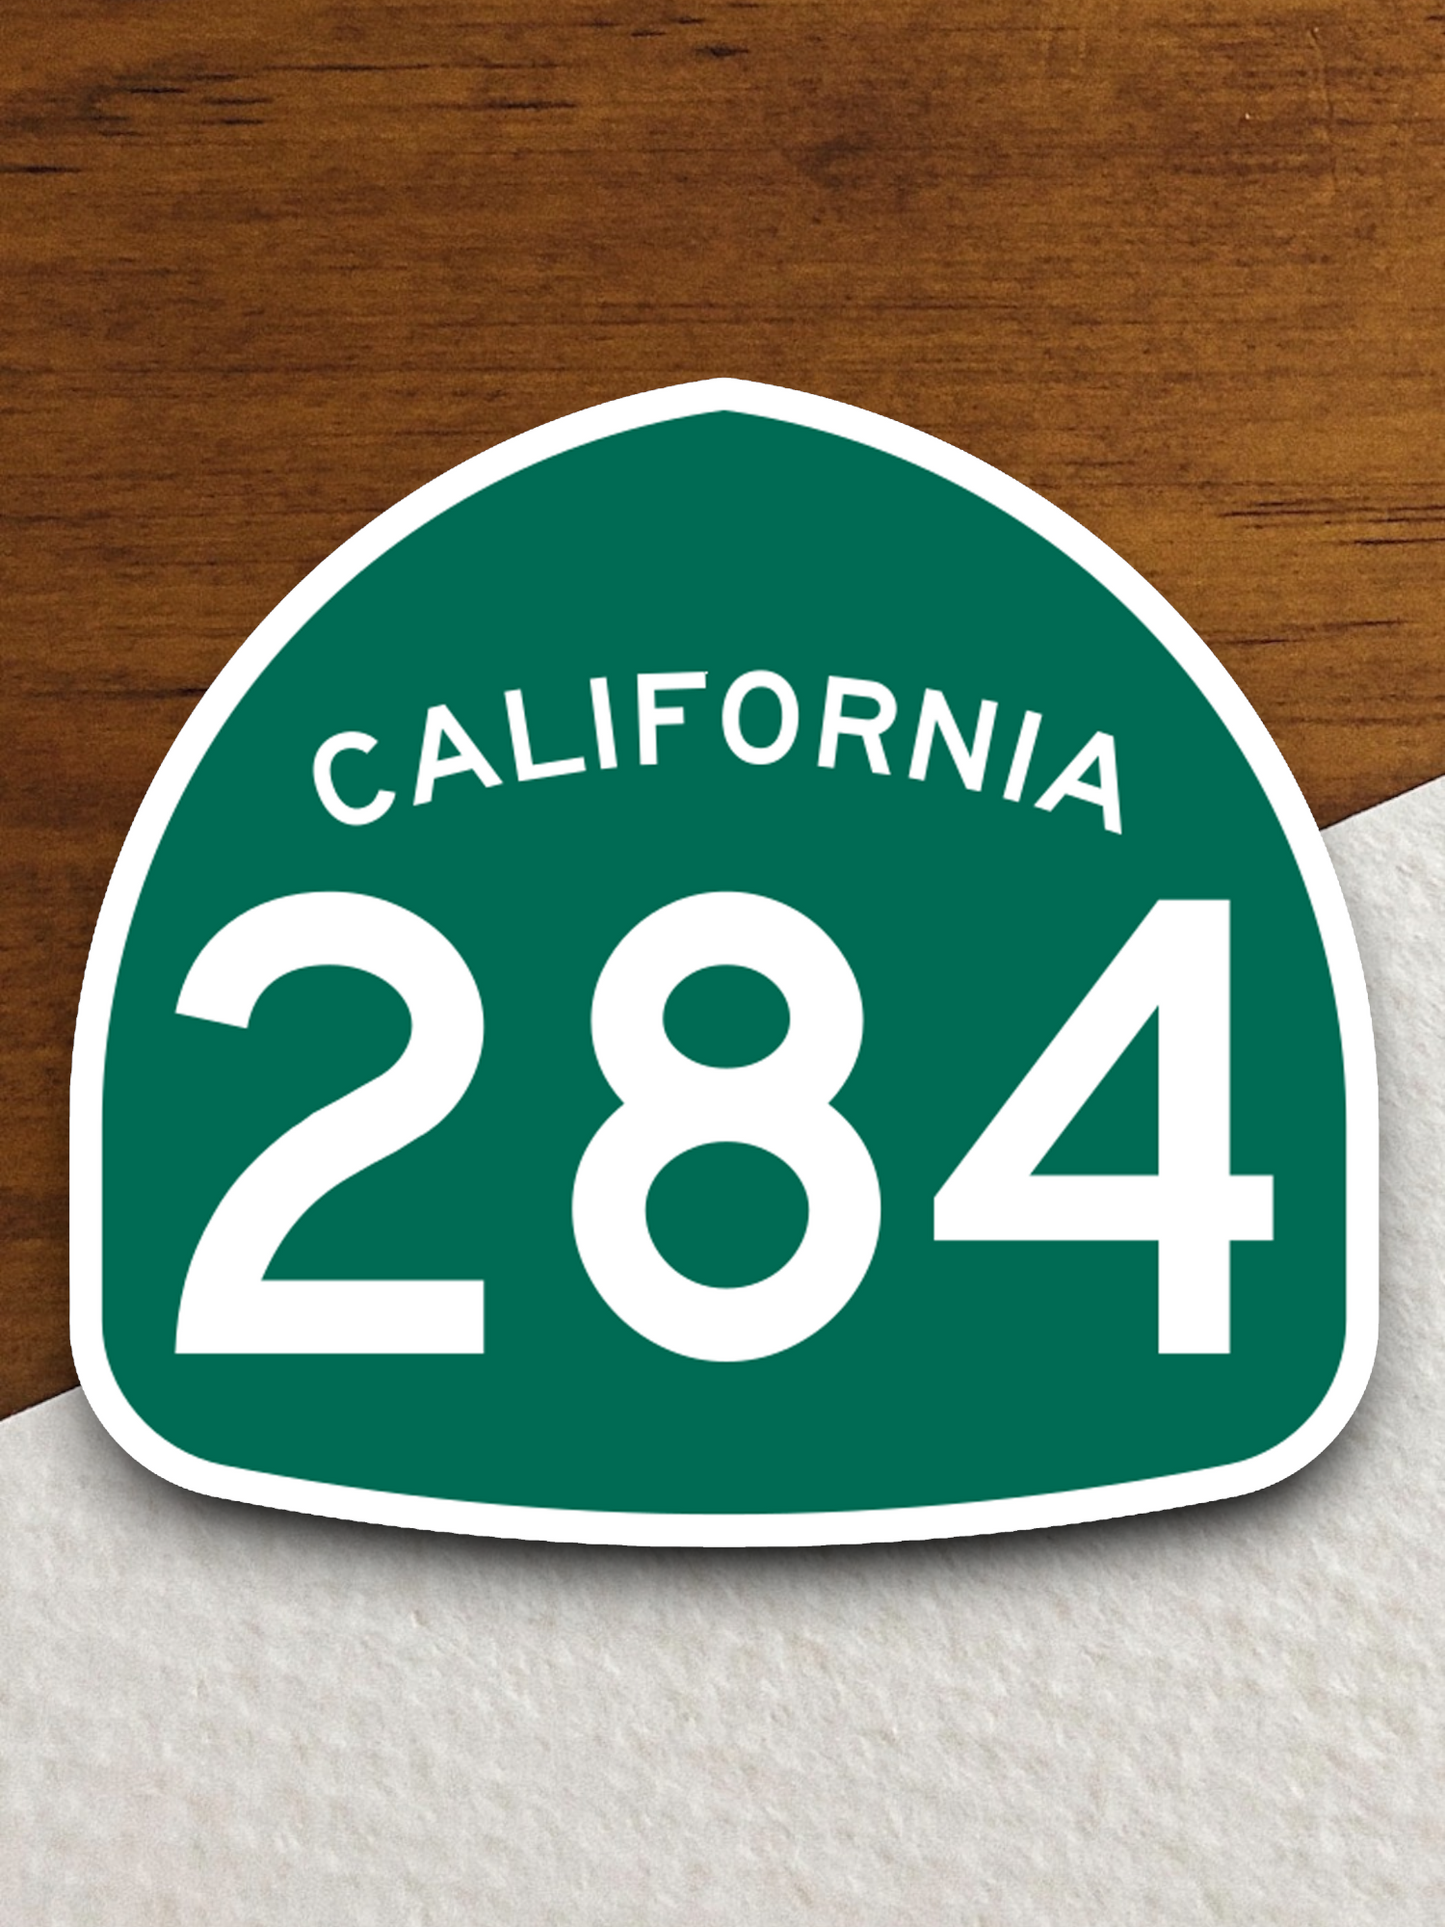 California State Route 284 Road Sign Sticker